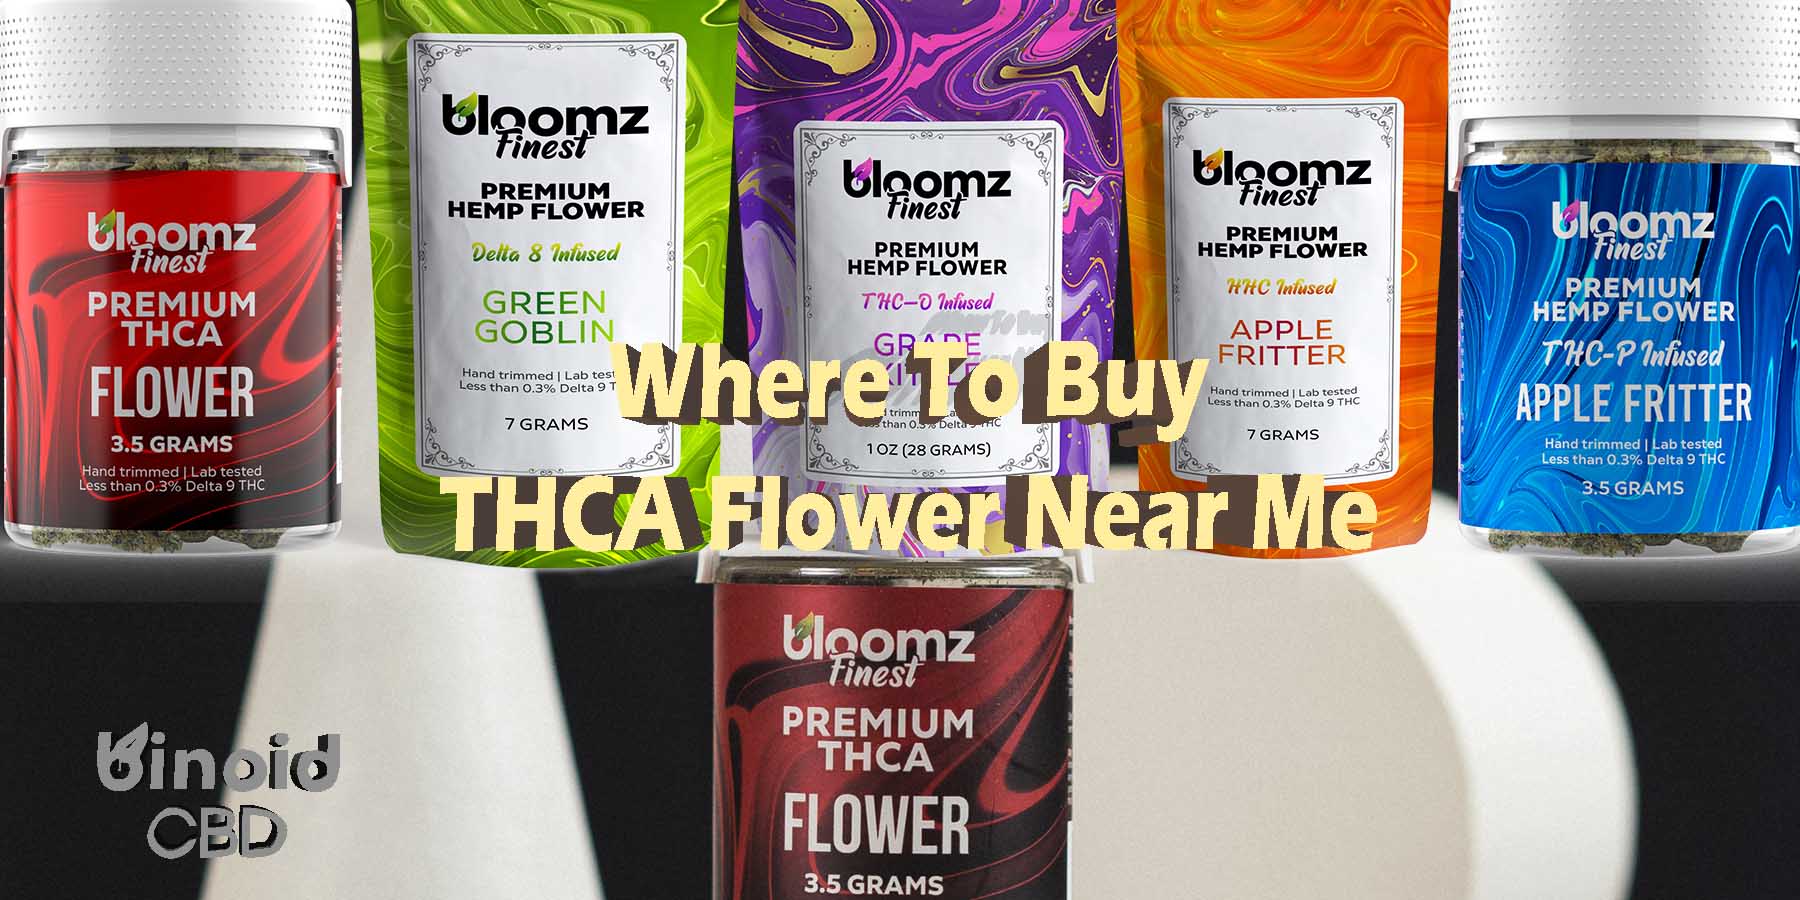 Where To Buy THCA Flower Near Me Where And How To Buy THCA Flower By The Pound Made Pre Rolls Where To Get Near Me Best Place Lowest Price Coupon Discount Strongest Brand Bloomz